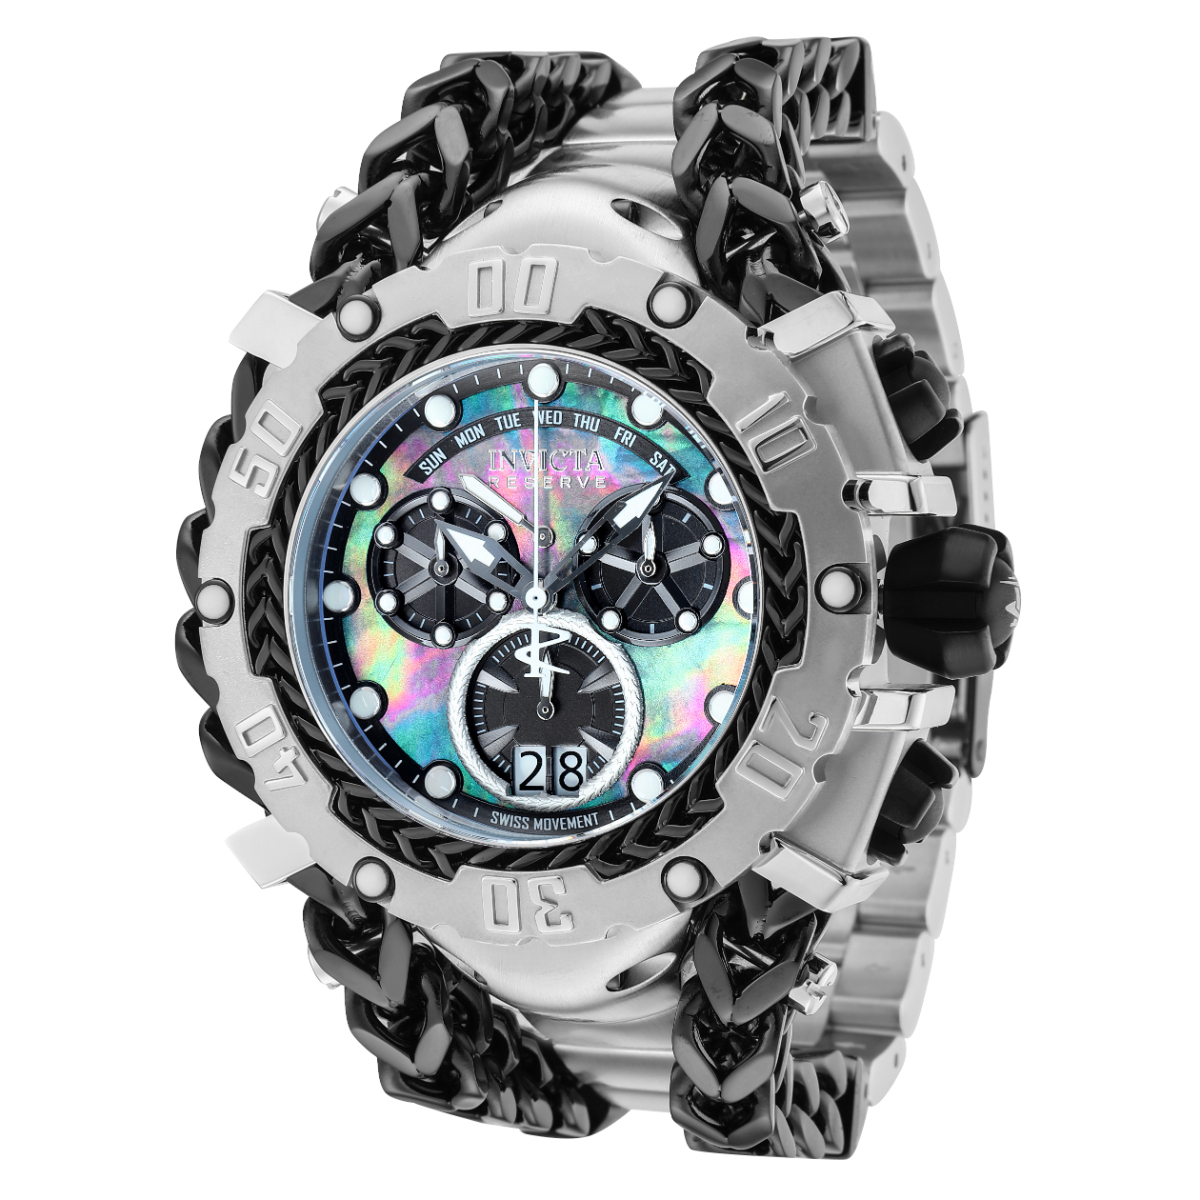 Invicta Reserve Gladiator Men's Watch w/Mother of Pearl Dial - 55.25mm, Steel, Black (36887)